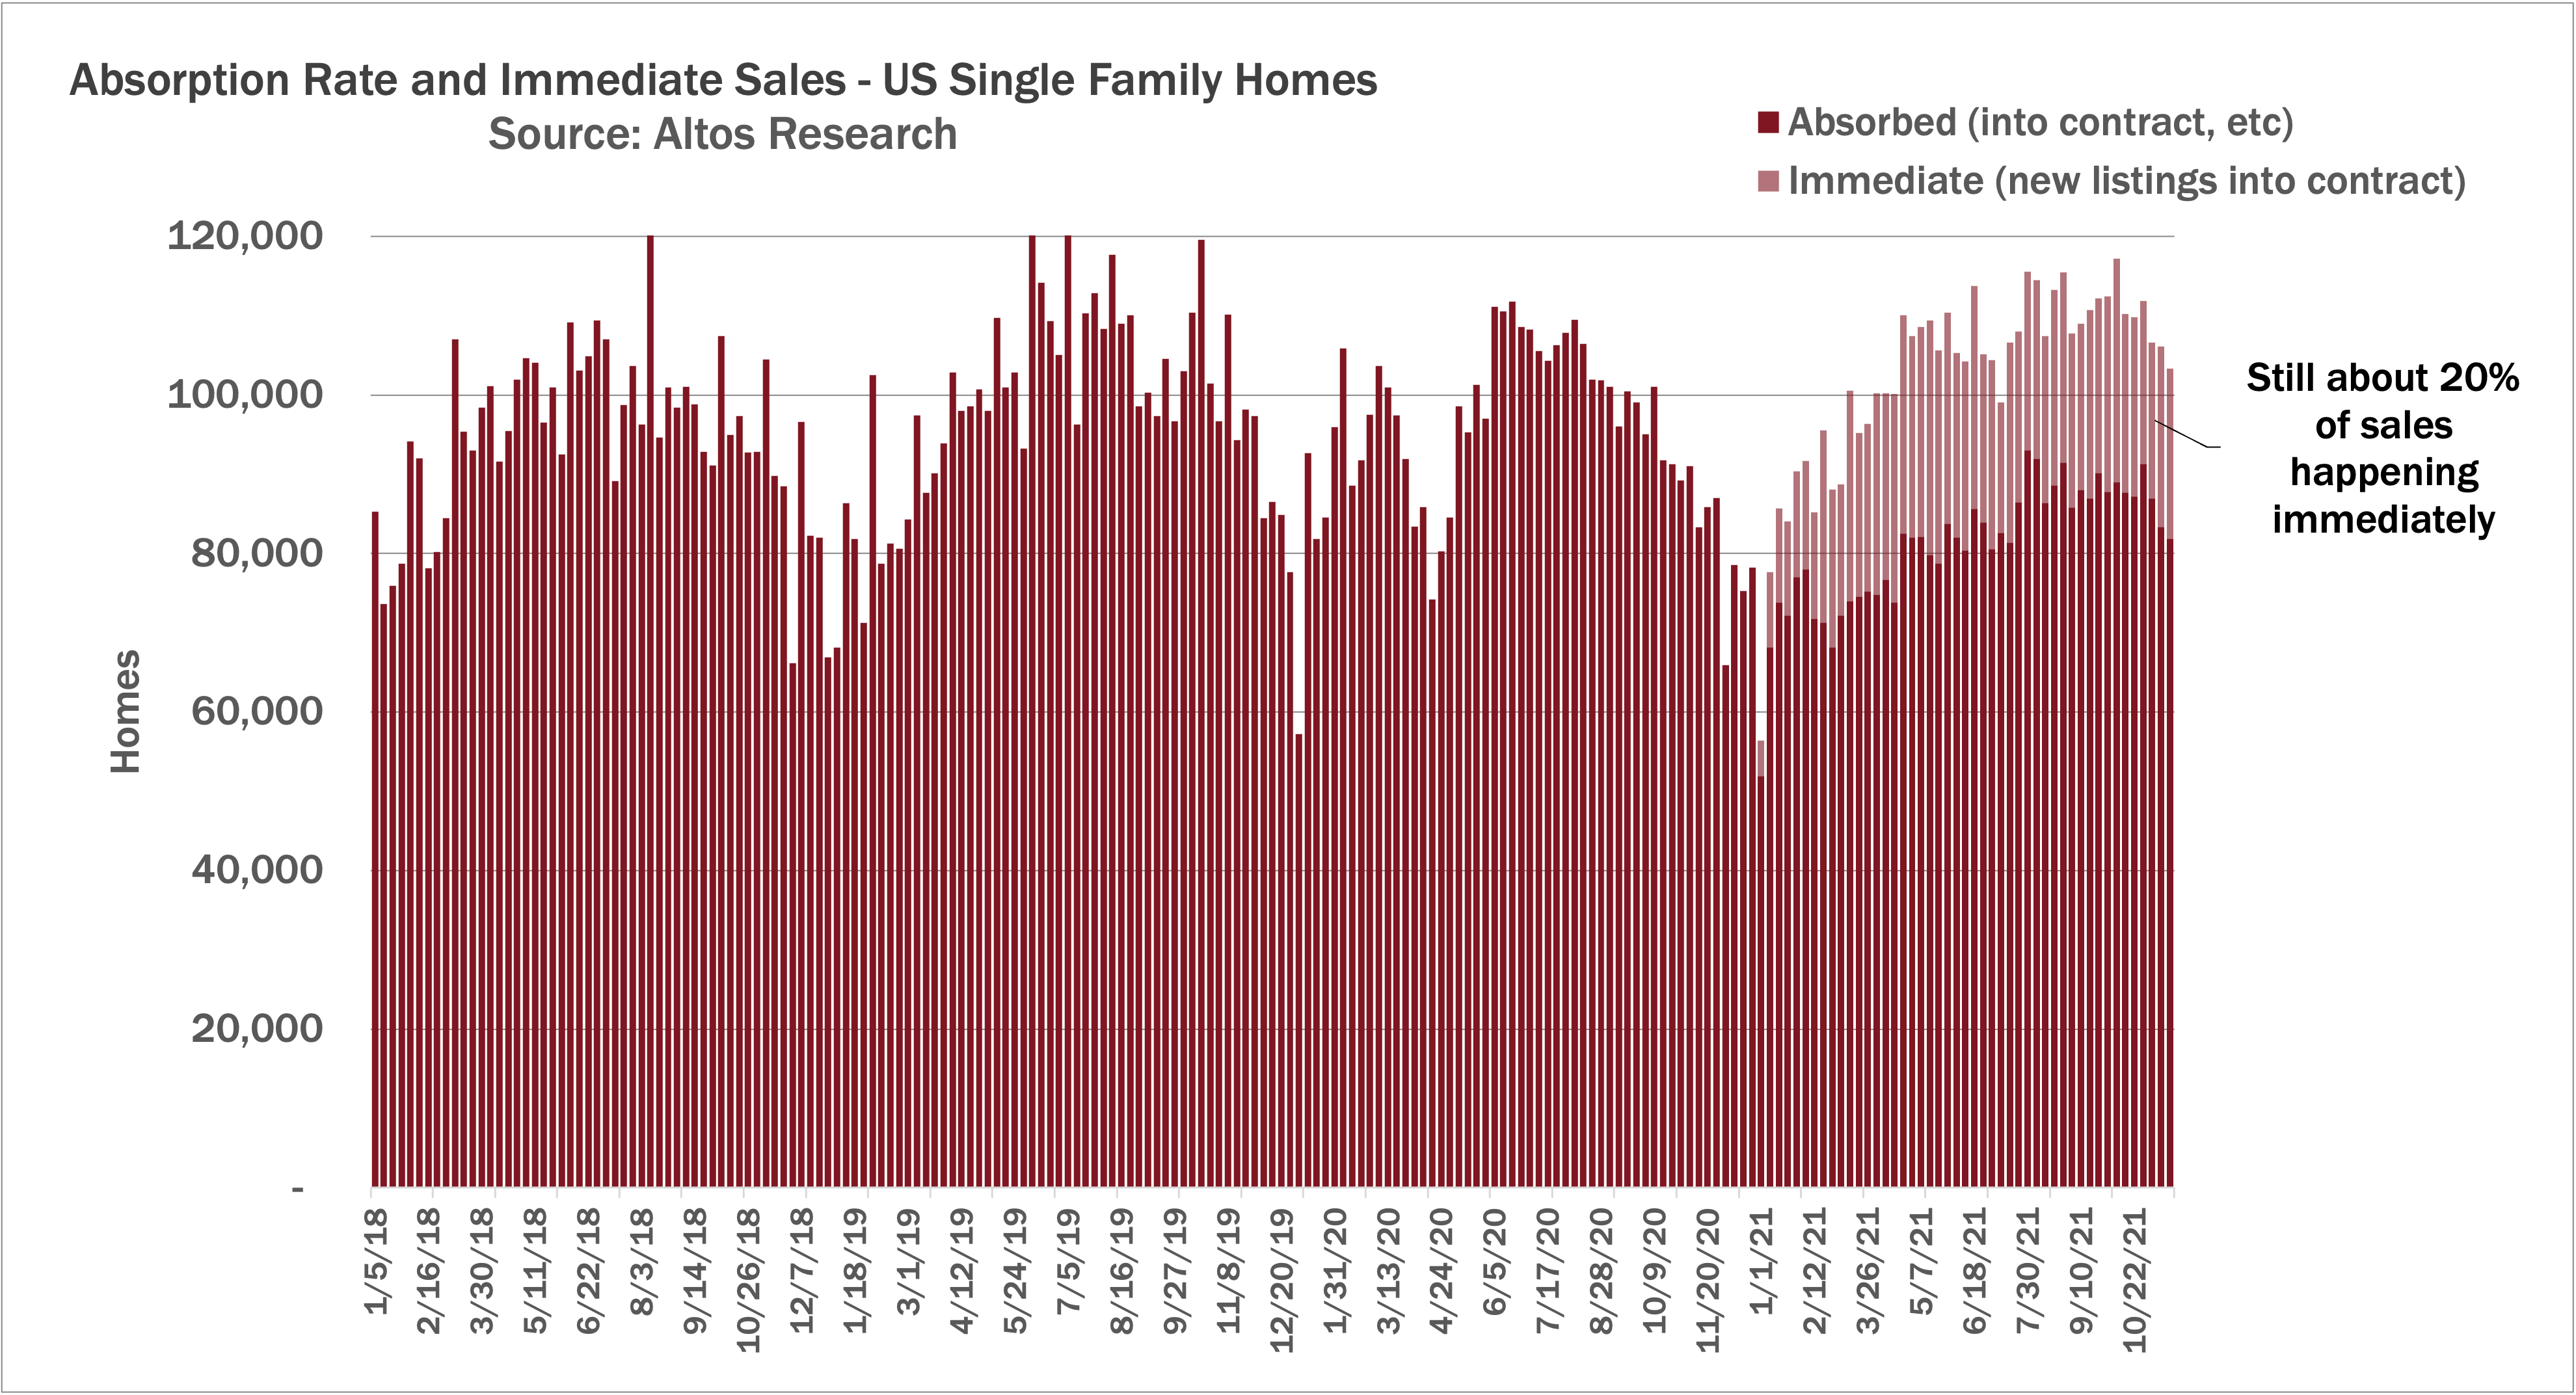 112221-US-Single-Family-Homes-Absorbed-immediate-sales